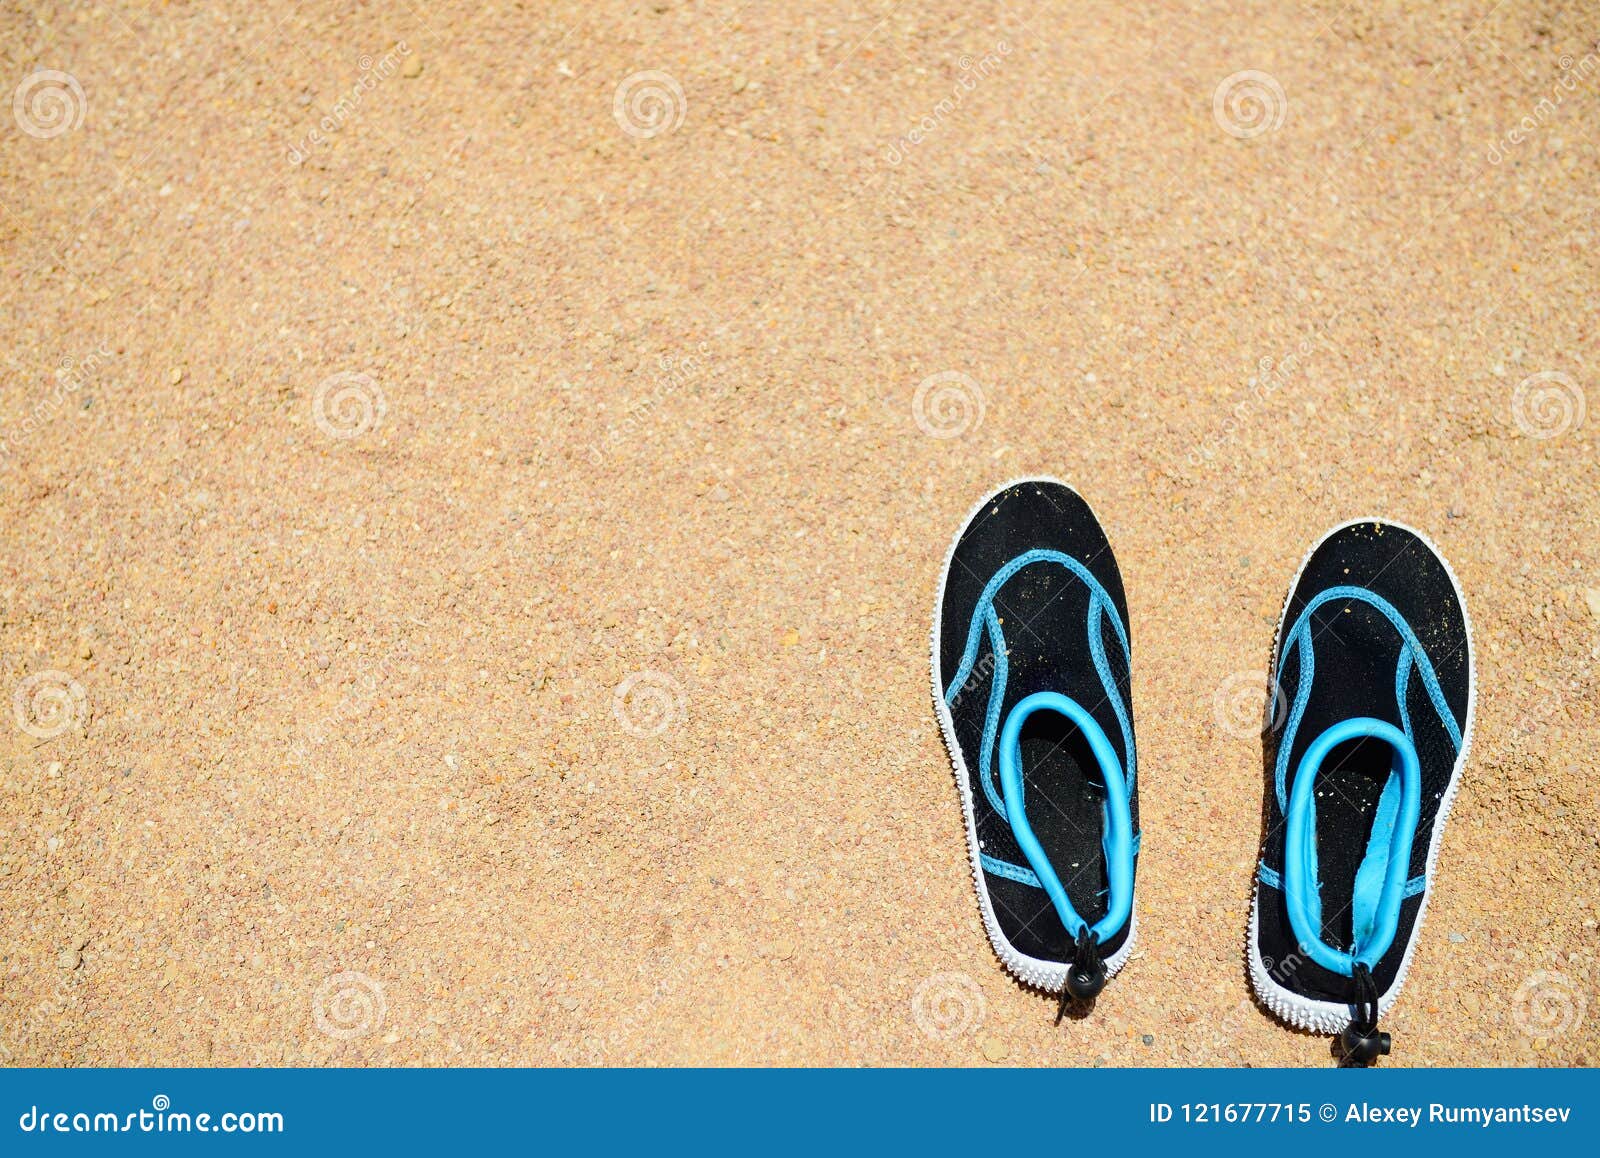 Coral shoes on sandy beach stock image 